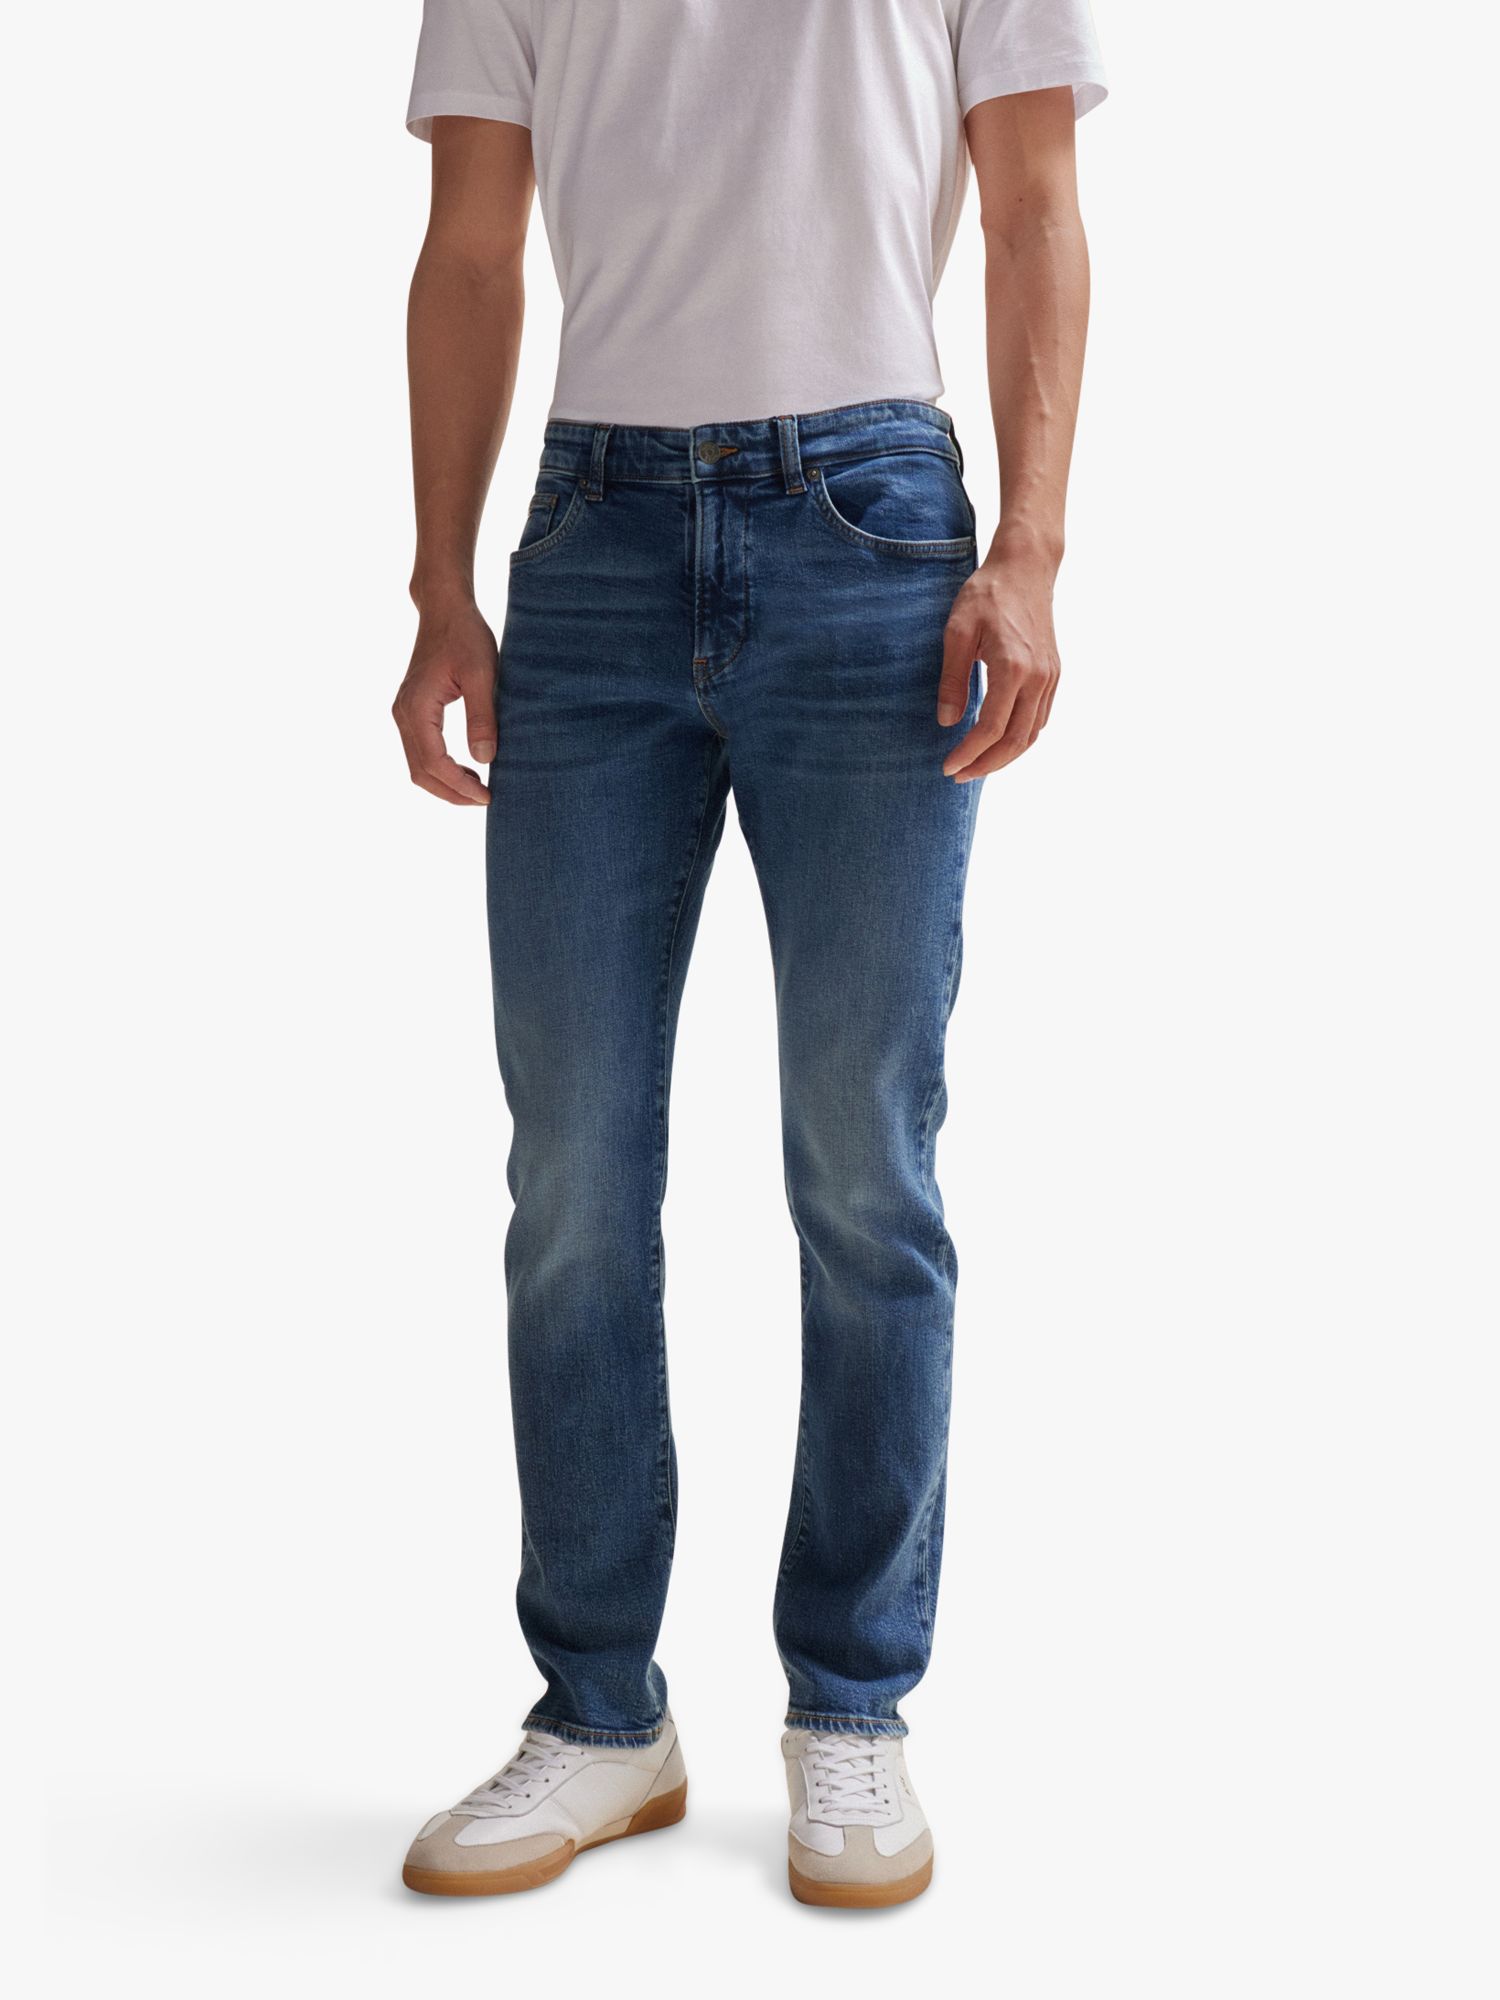 BOSS Delware Slim Fit Jeans, Blue, 33S